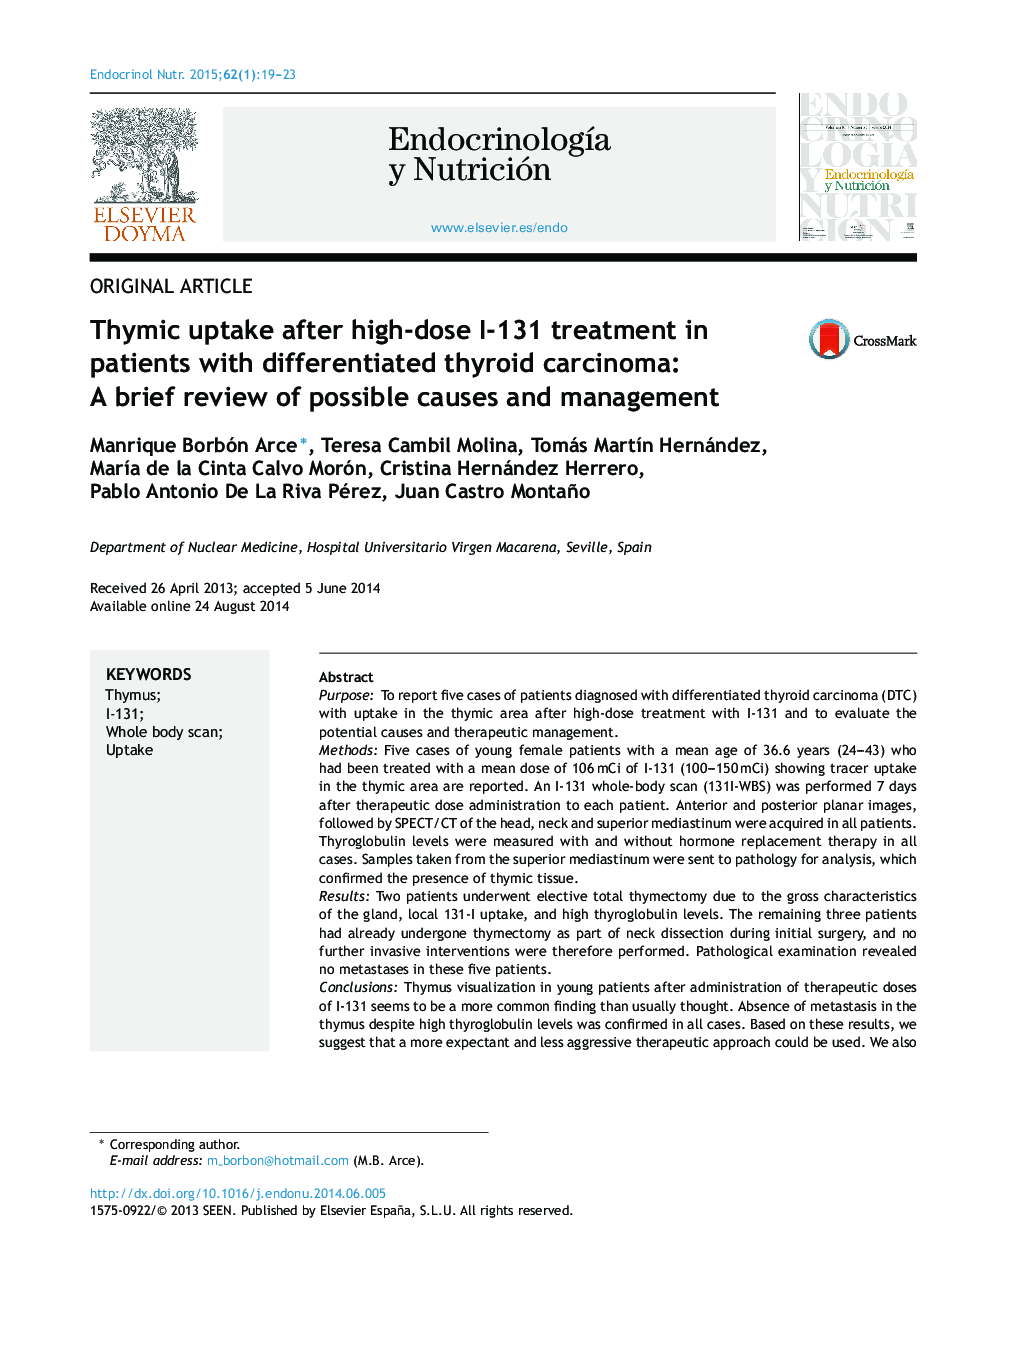 Thymic uptake after high-dose I-131 treatment in patients with differentiated thyroid carcinoma: A brief review of possible causes and management